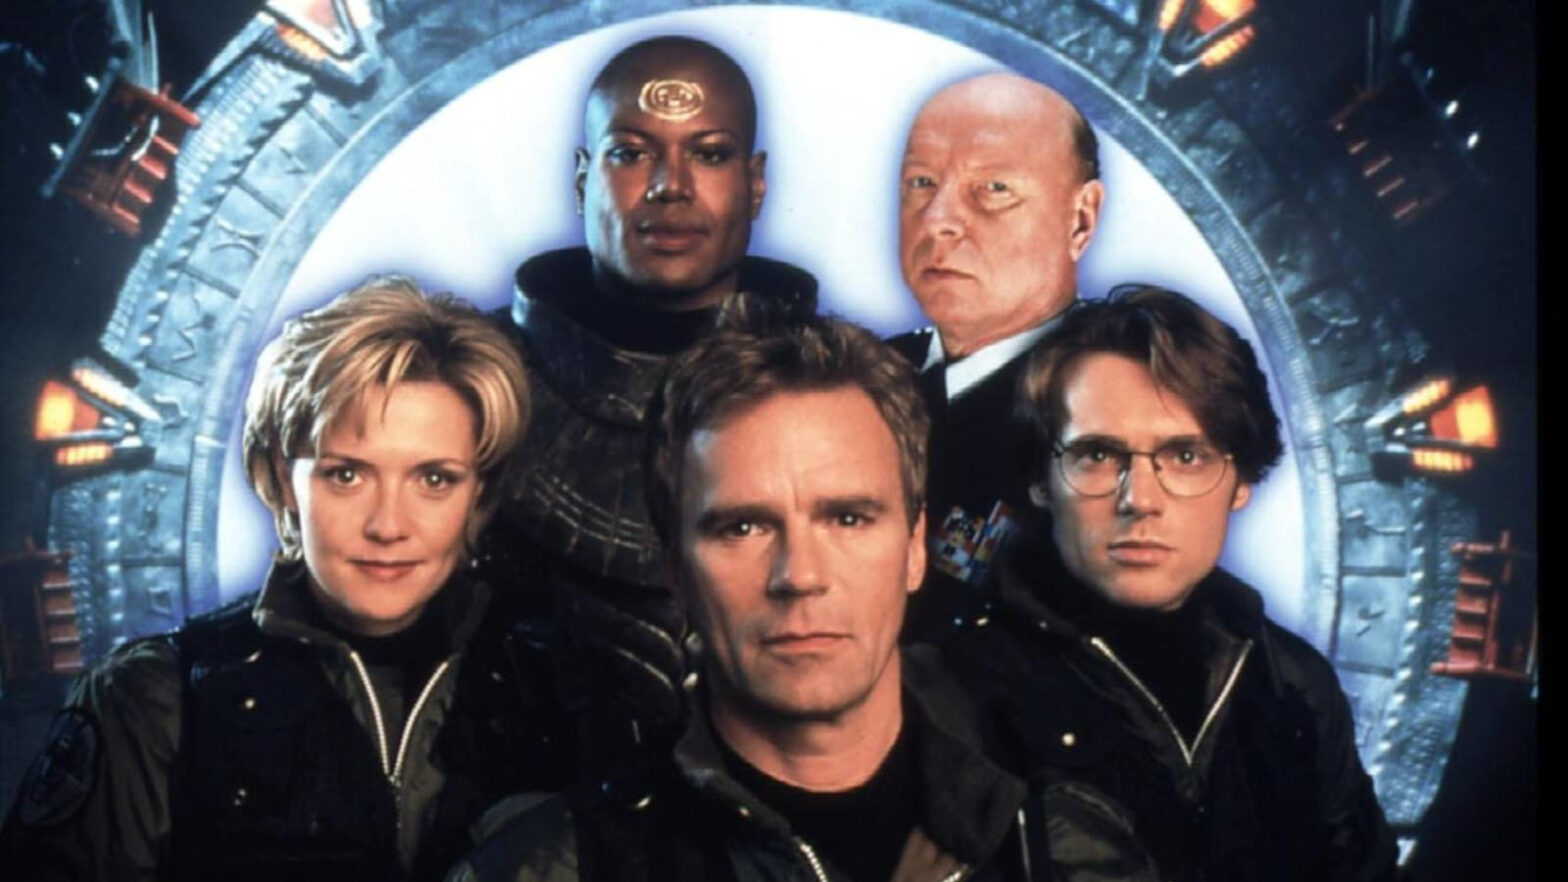 Stargate And James Bond Have Officially Been Sold Off To A Streaming Servic...